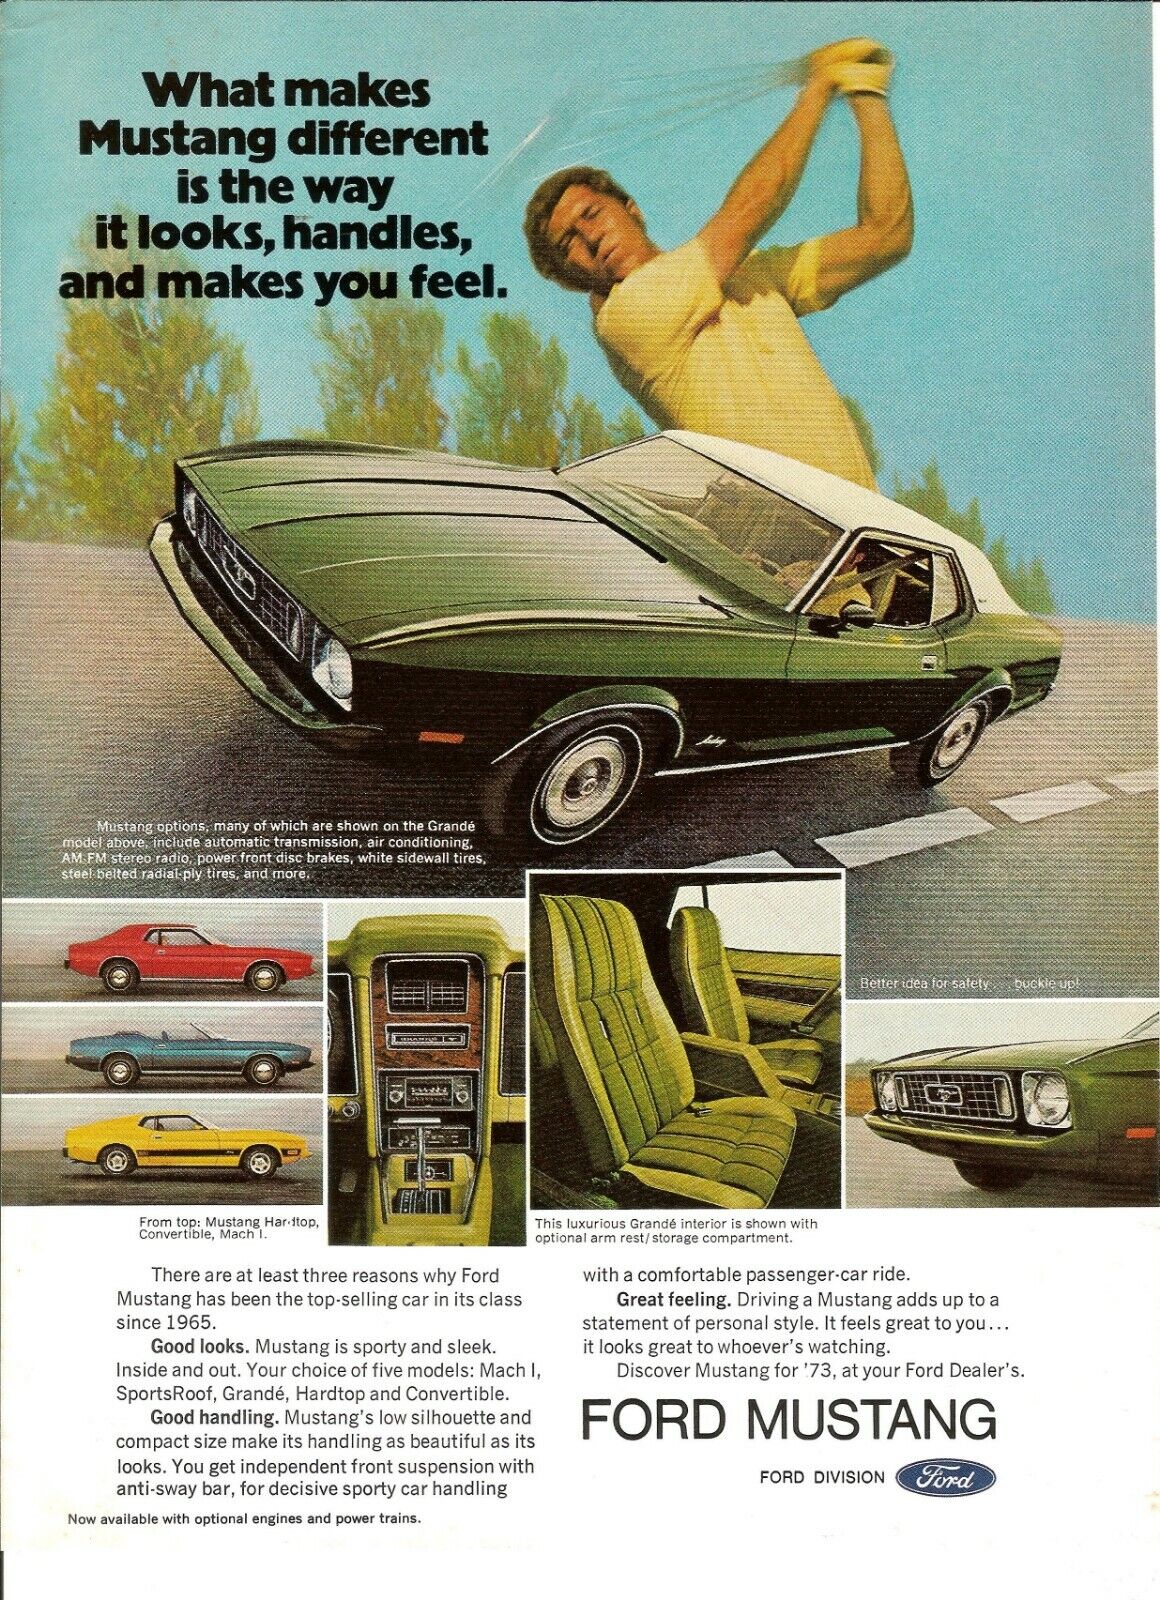 1973 Ford Mustang Vintage Magazine Ad  Ford Mustang & Golfer